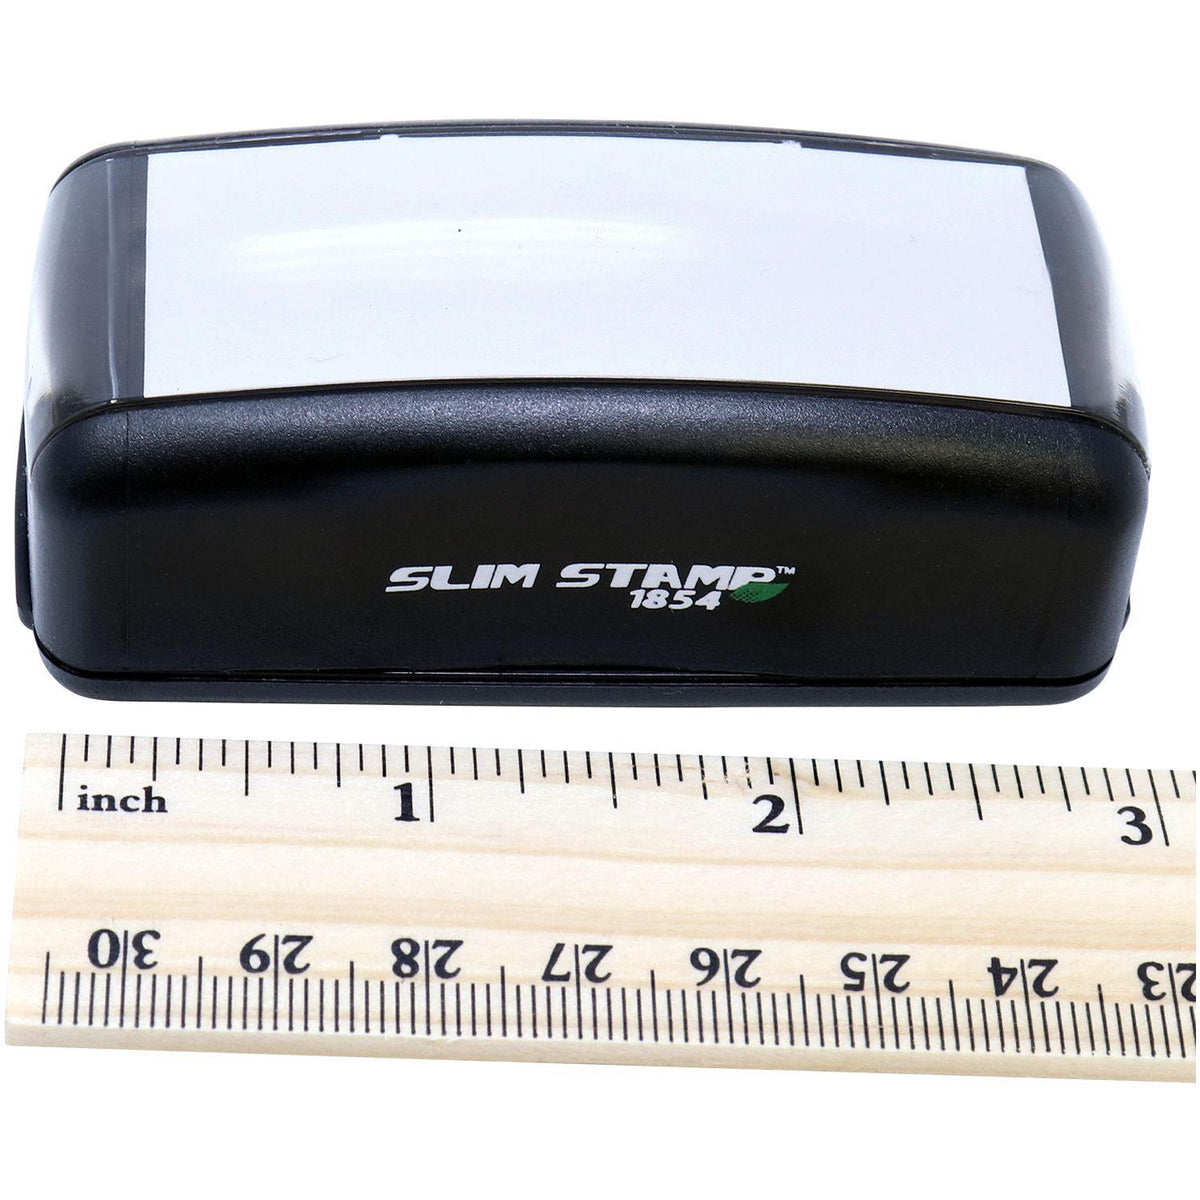 Measurement Large Pre-Inked Bravo with Hands Stamp with Ruler